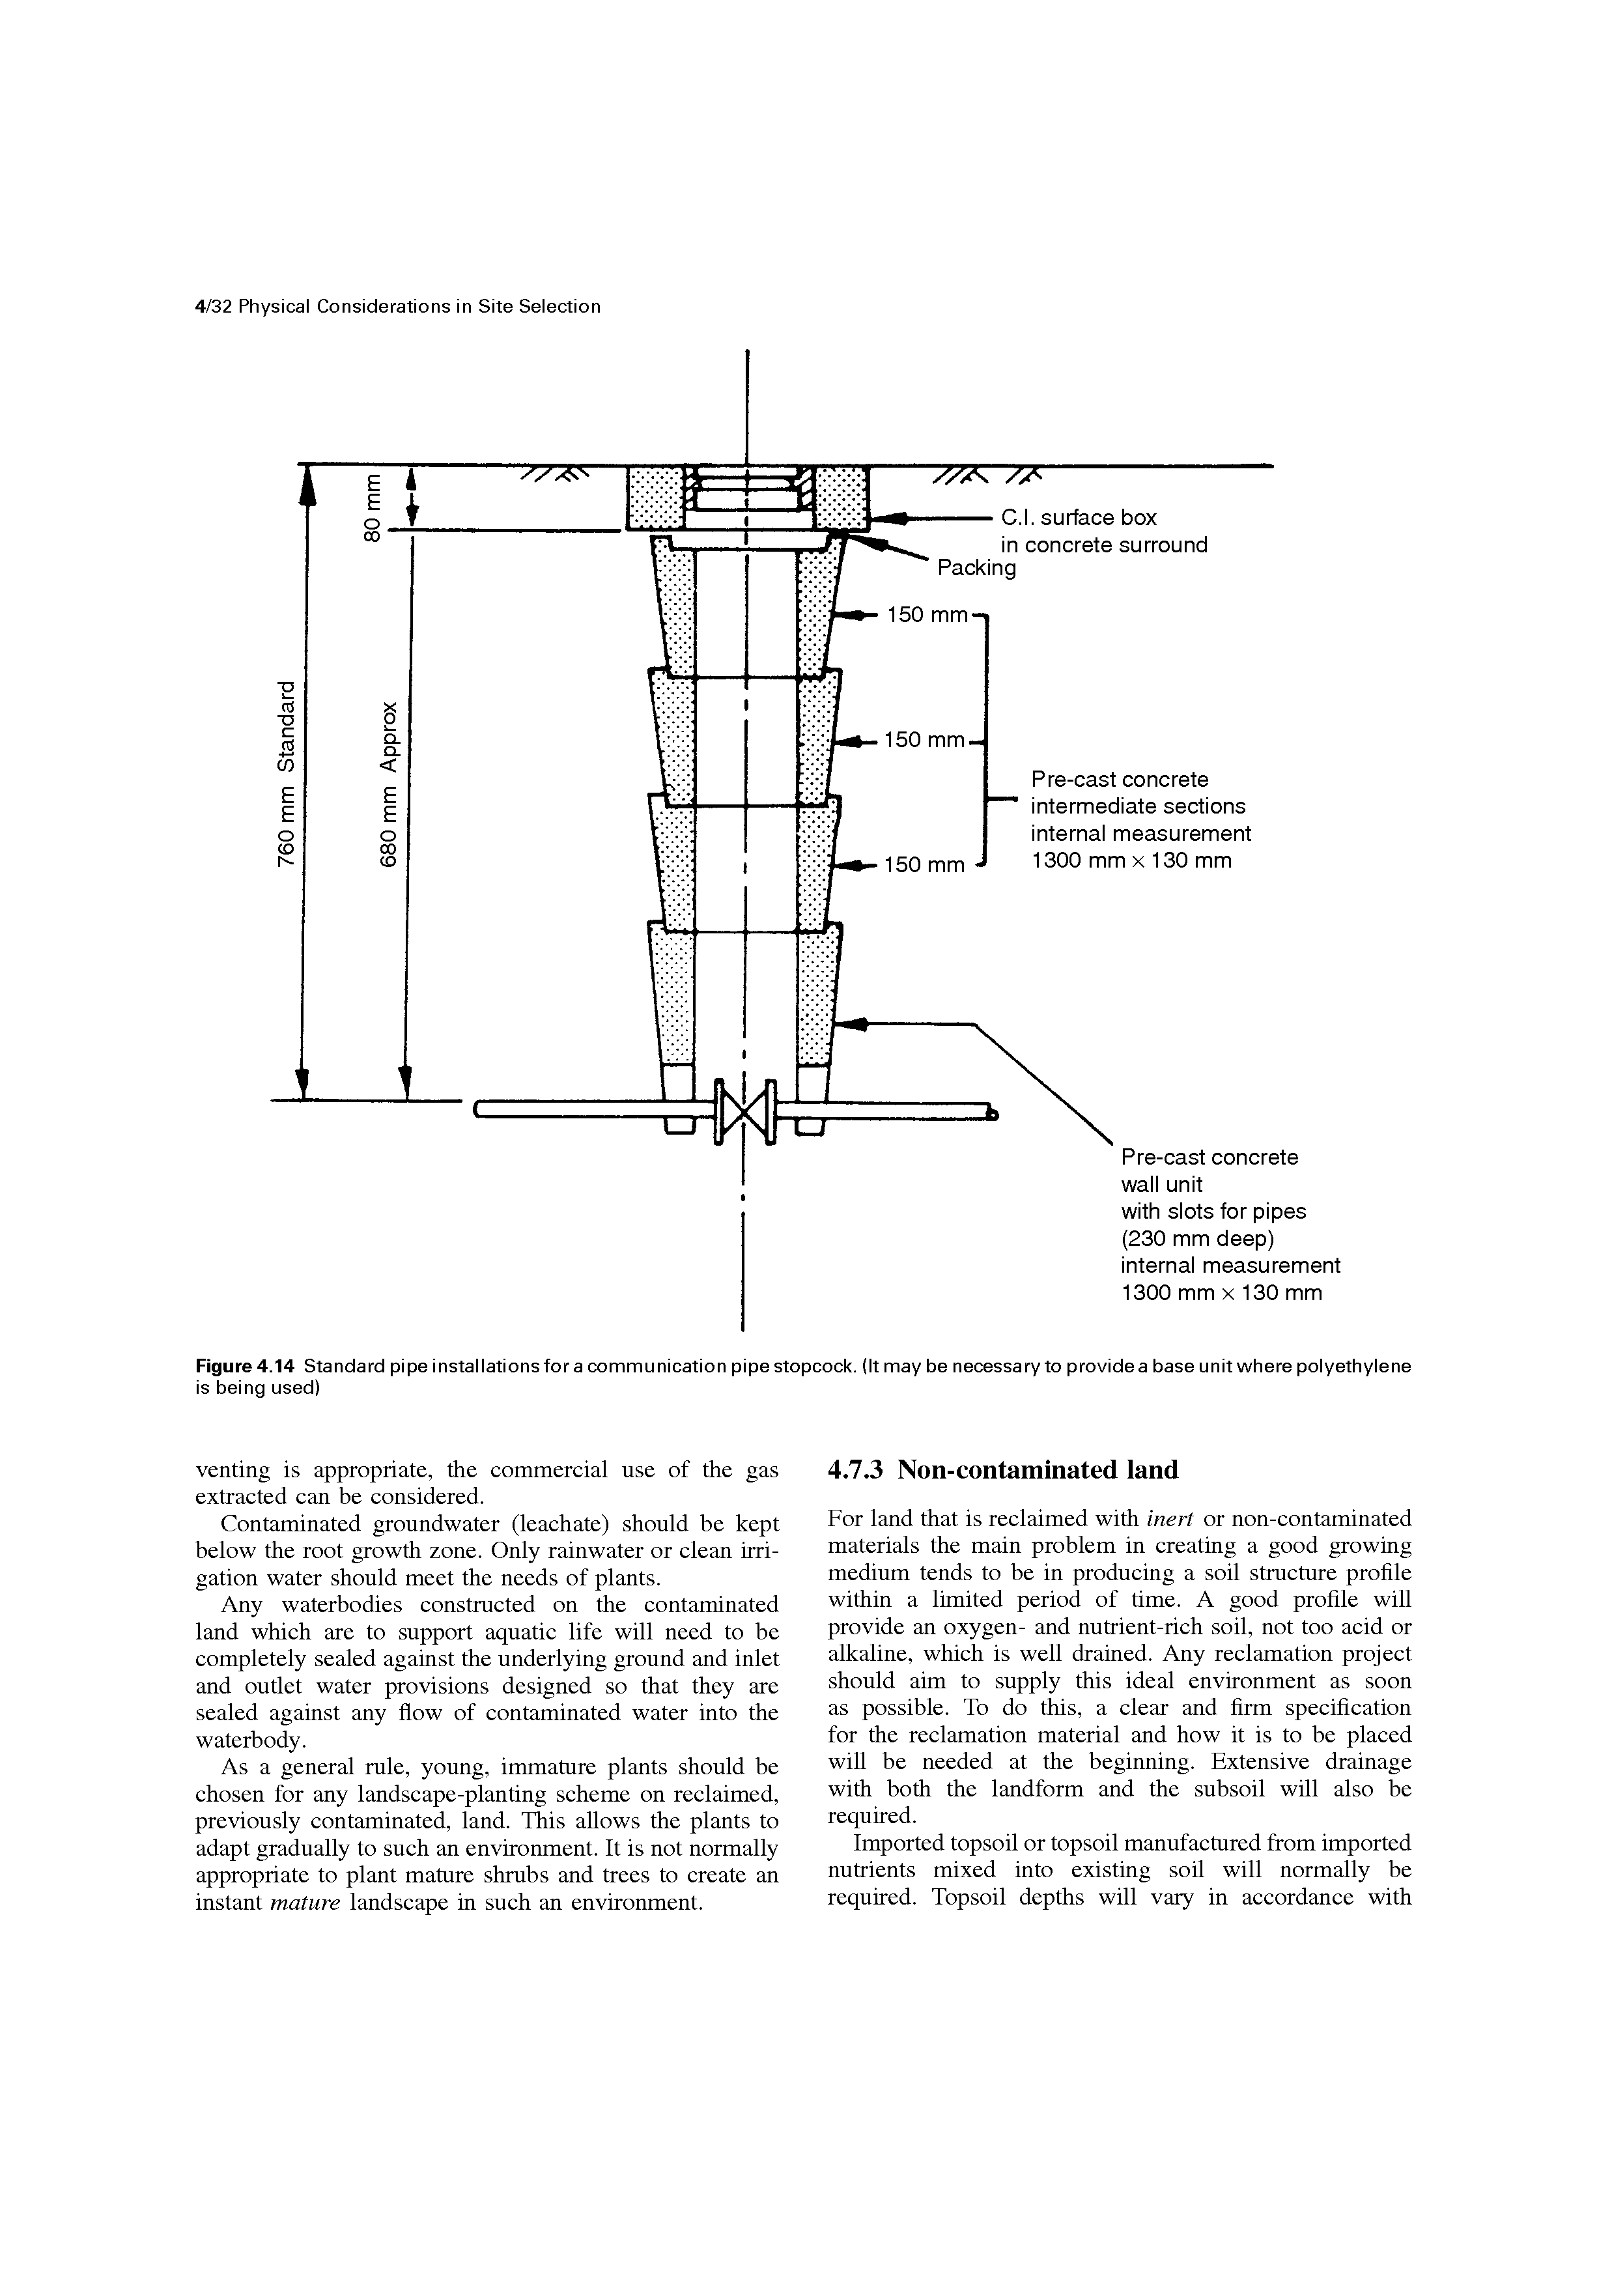 Figure 4.14 Standard pipe installations for a communication pipe stopcock. (It may be necessary to provide a base unit where polyethylene is being used)...